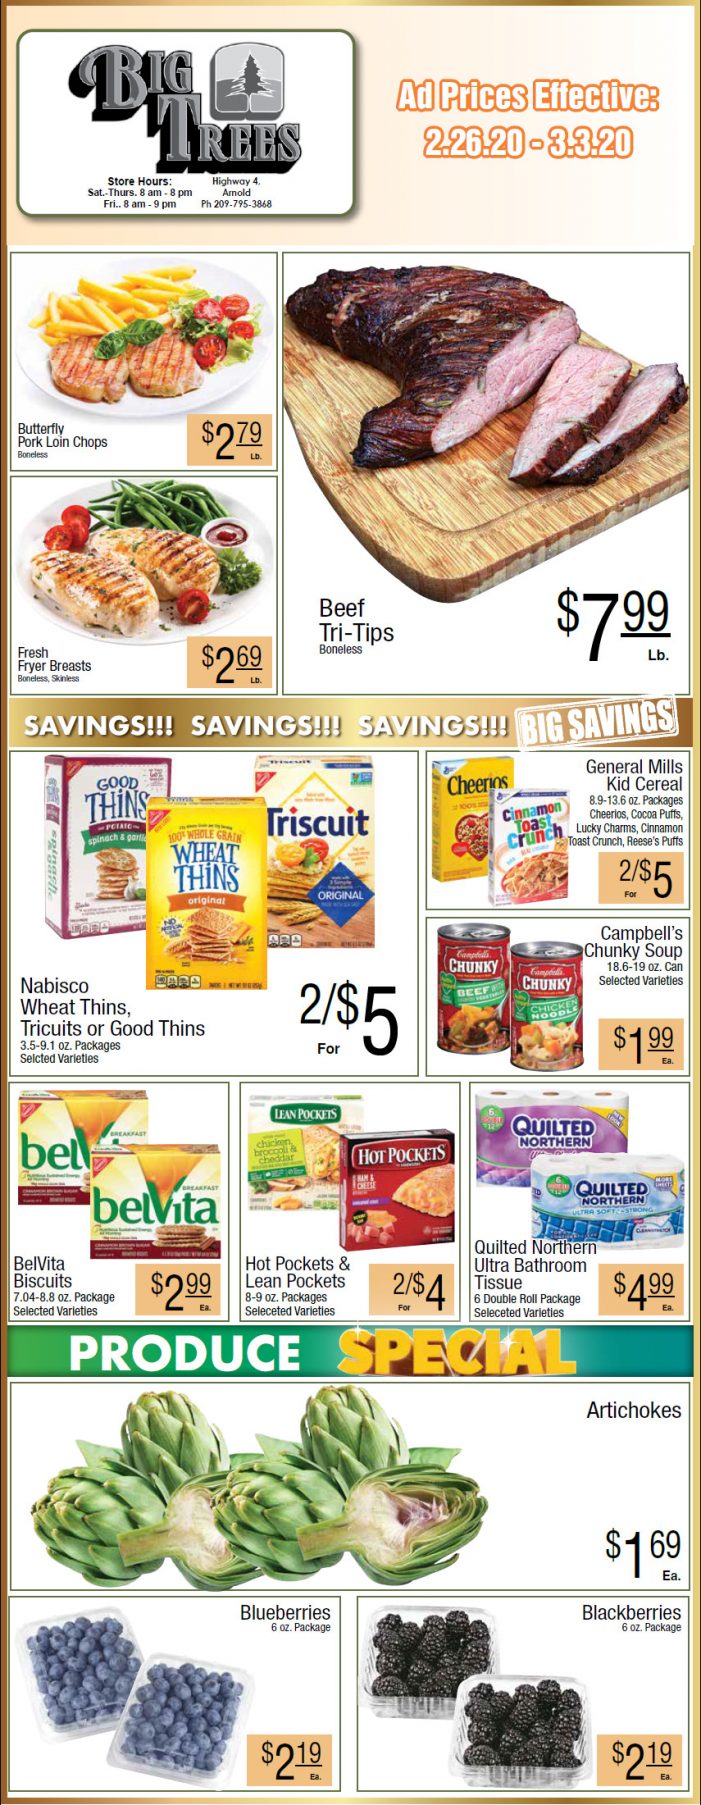 Big Trees Market Weekly Ad & Grocery Specials Through March 3rd